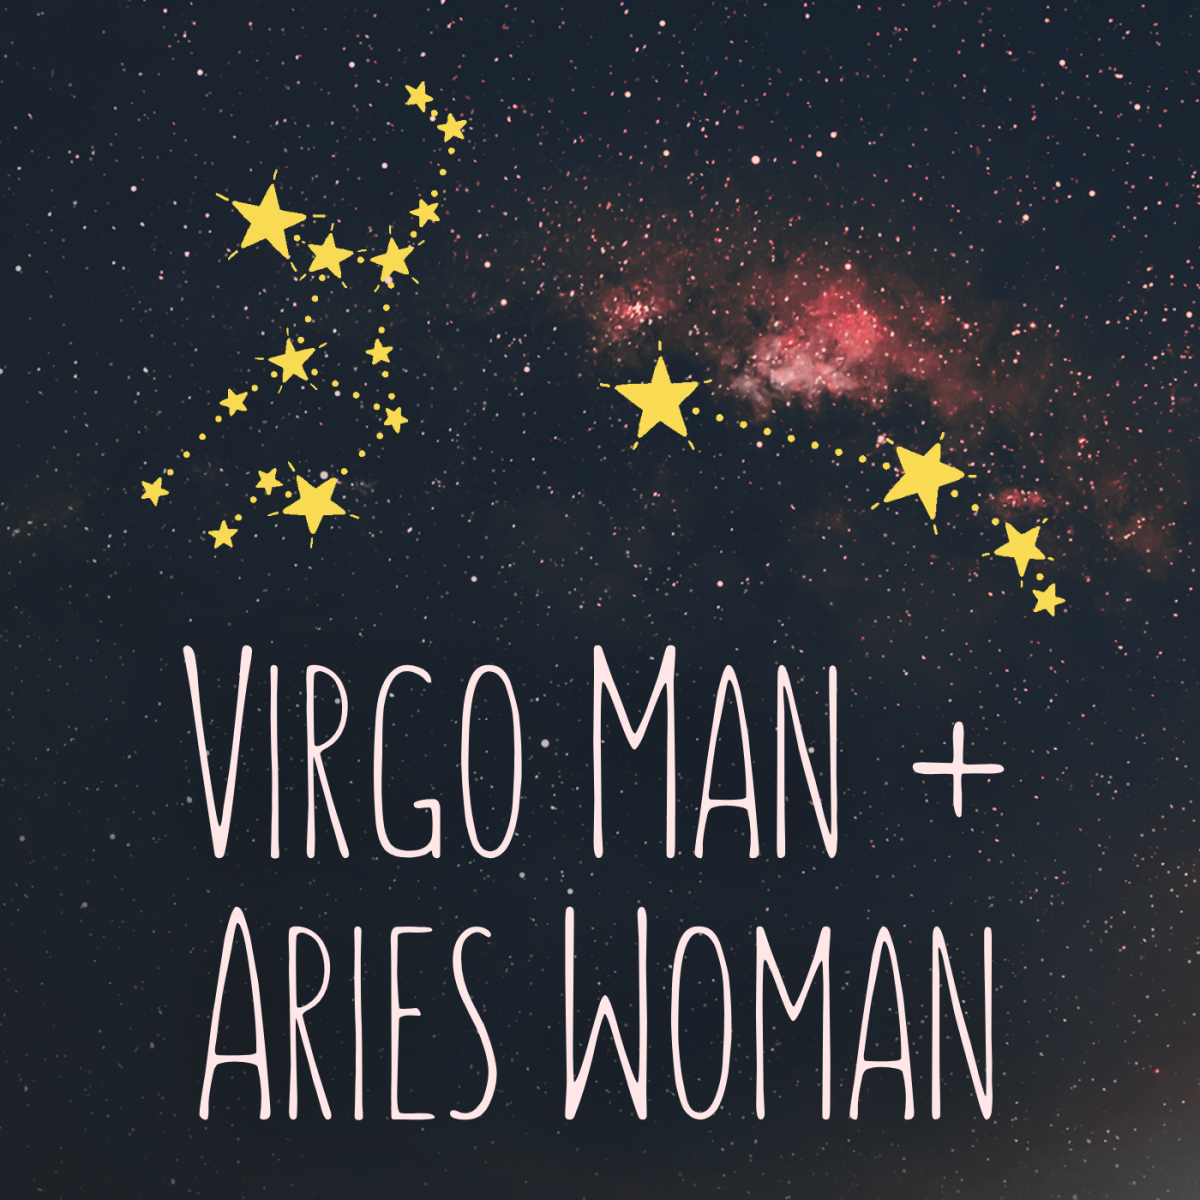 Aries Woman and Virgo Man in a Relationship